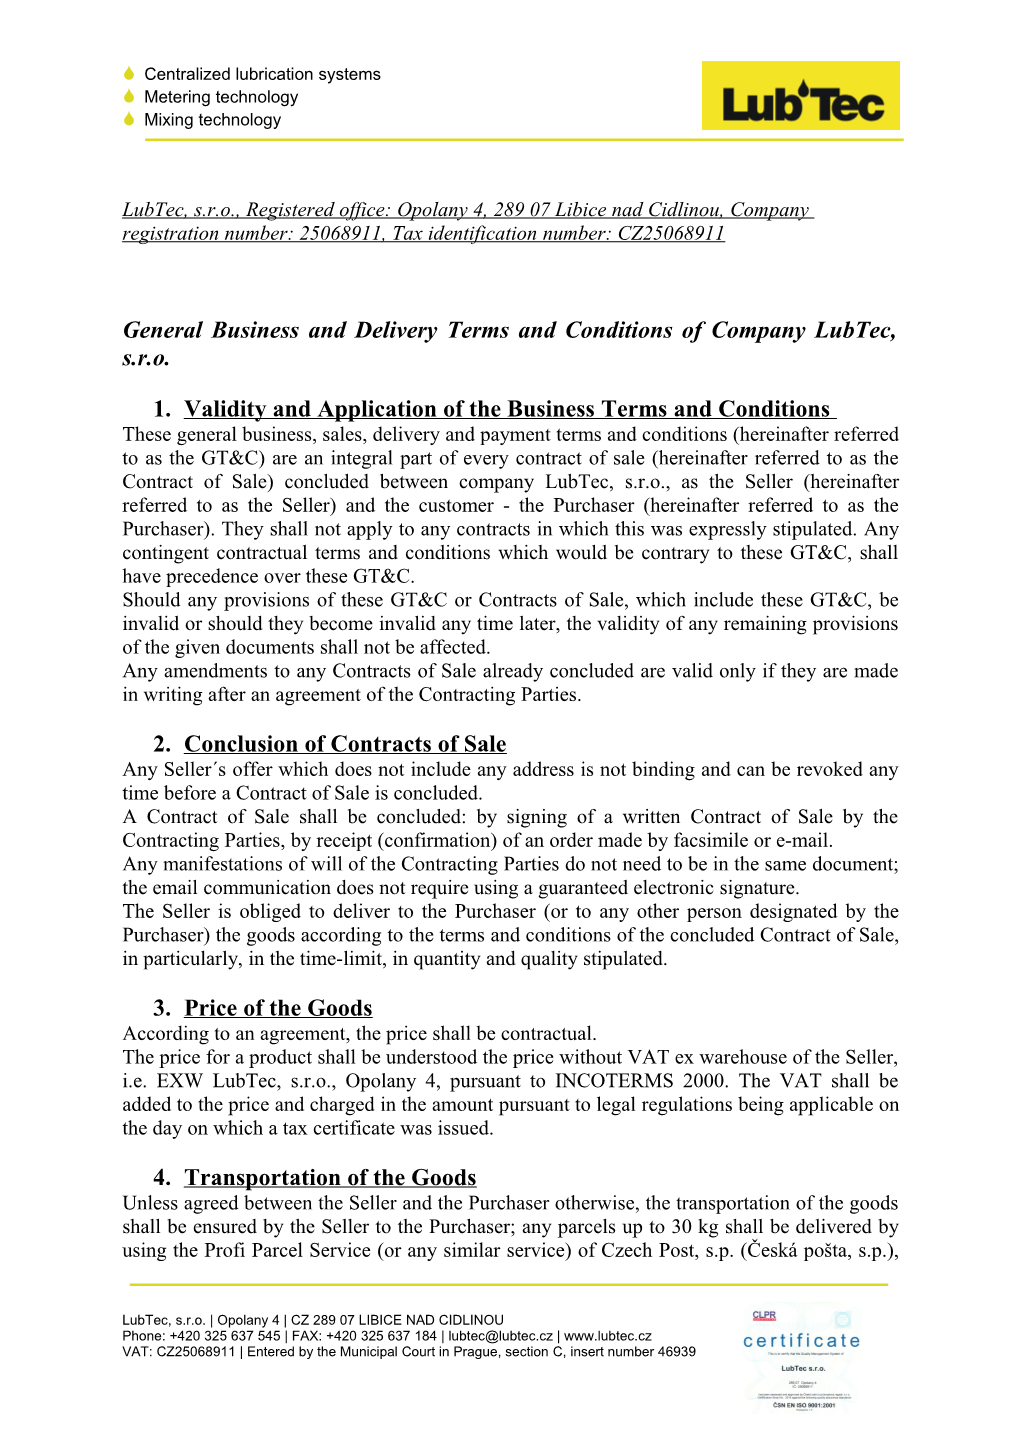 General Business Anddelivery Terms and Conditionsof Company Lubtec, S.R.O